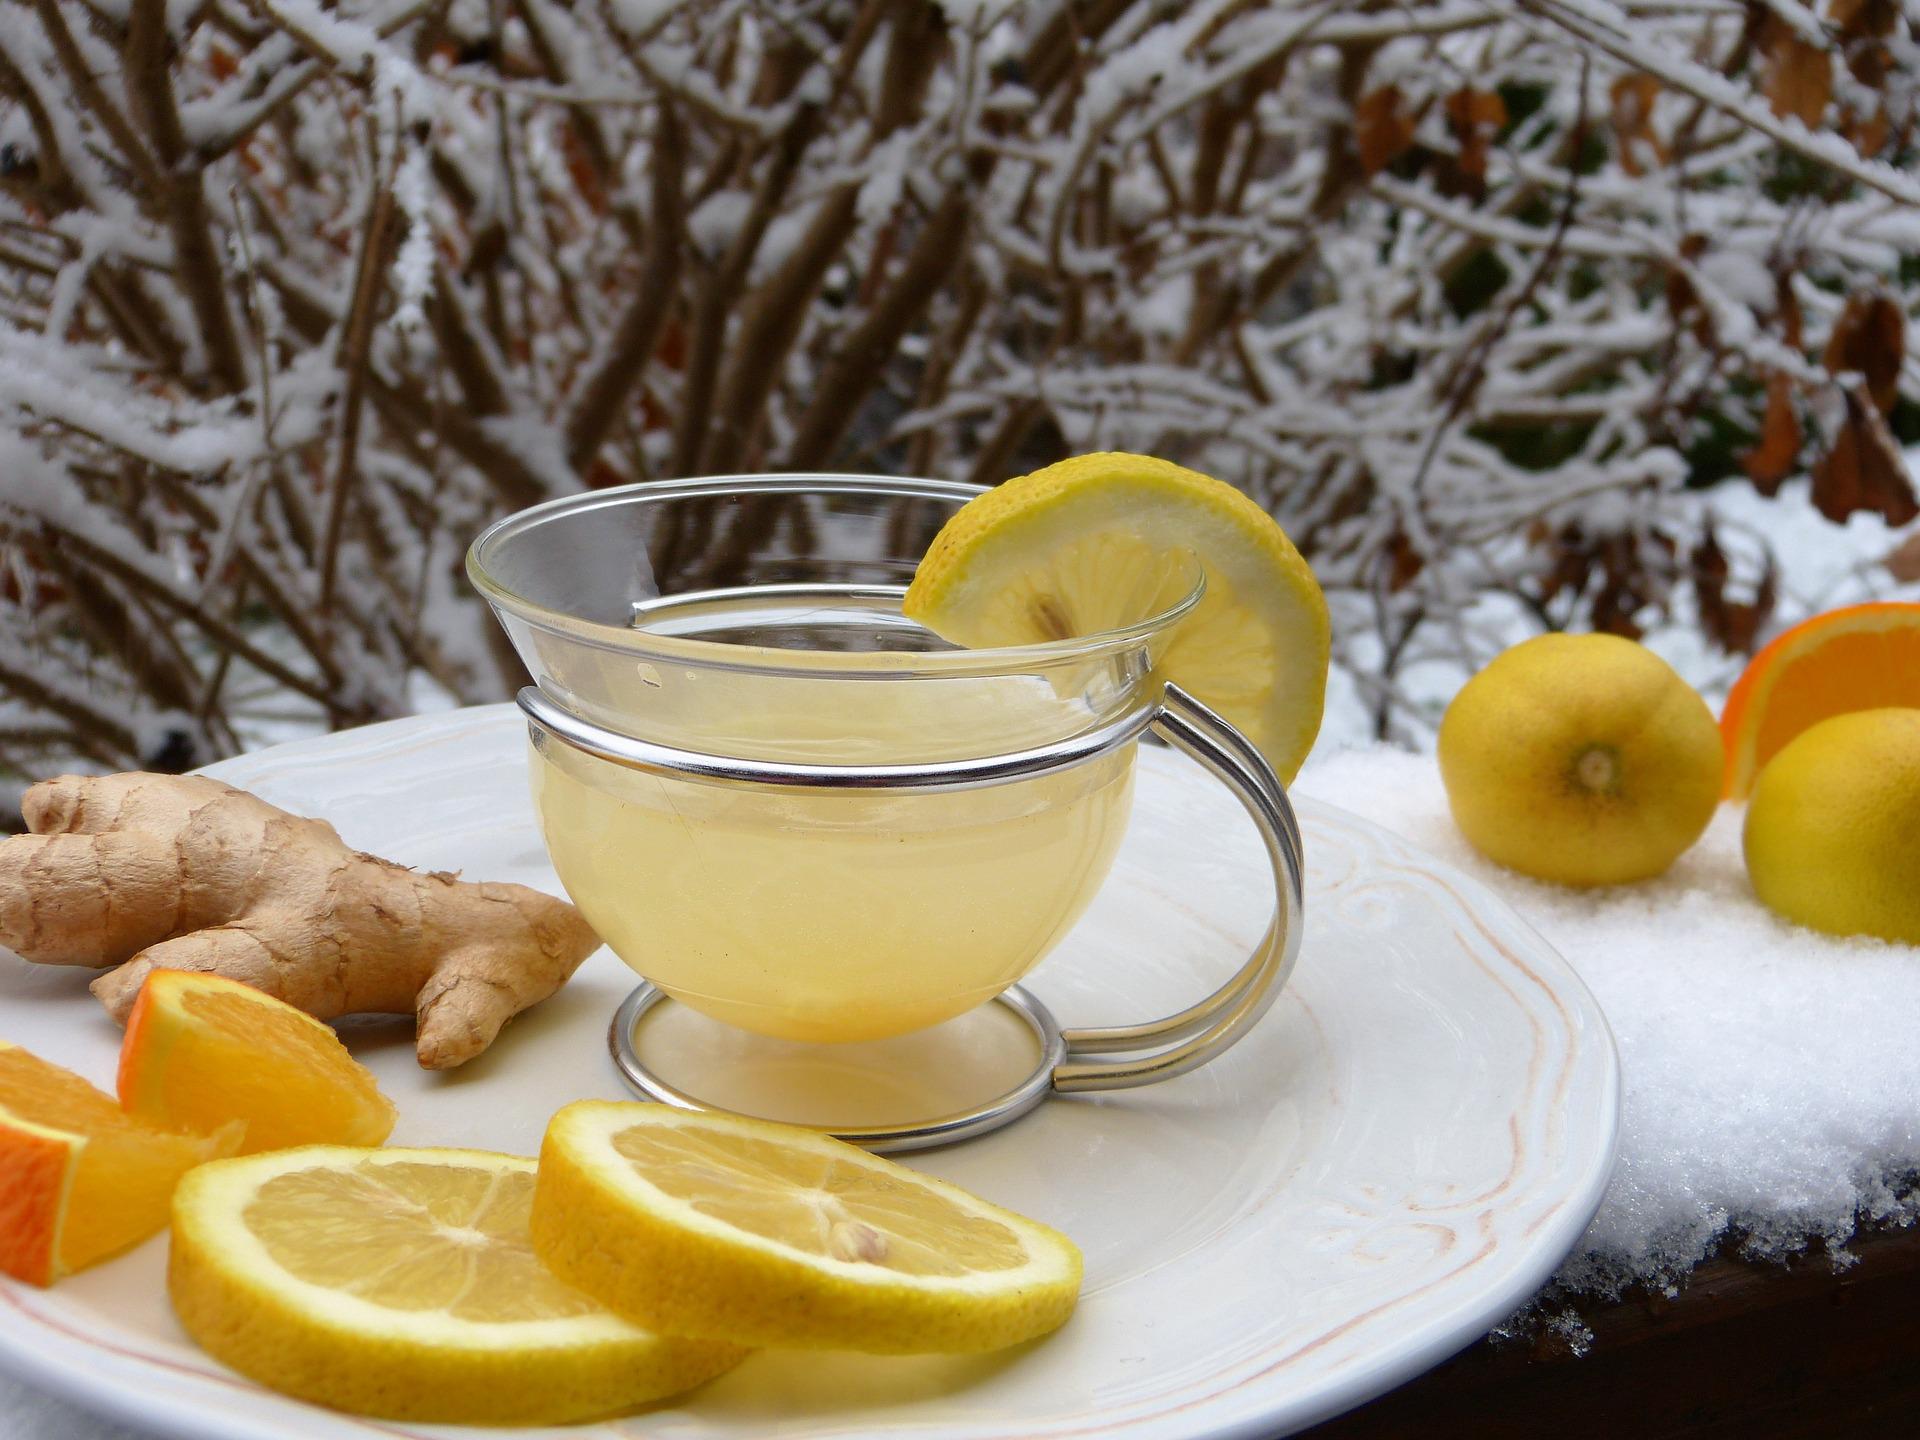 WINTER HAS SETTLED IN, KEEP YOUR IMMUNE SYSTEM STRONG!